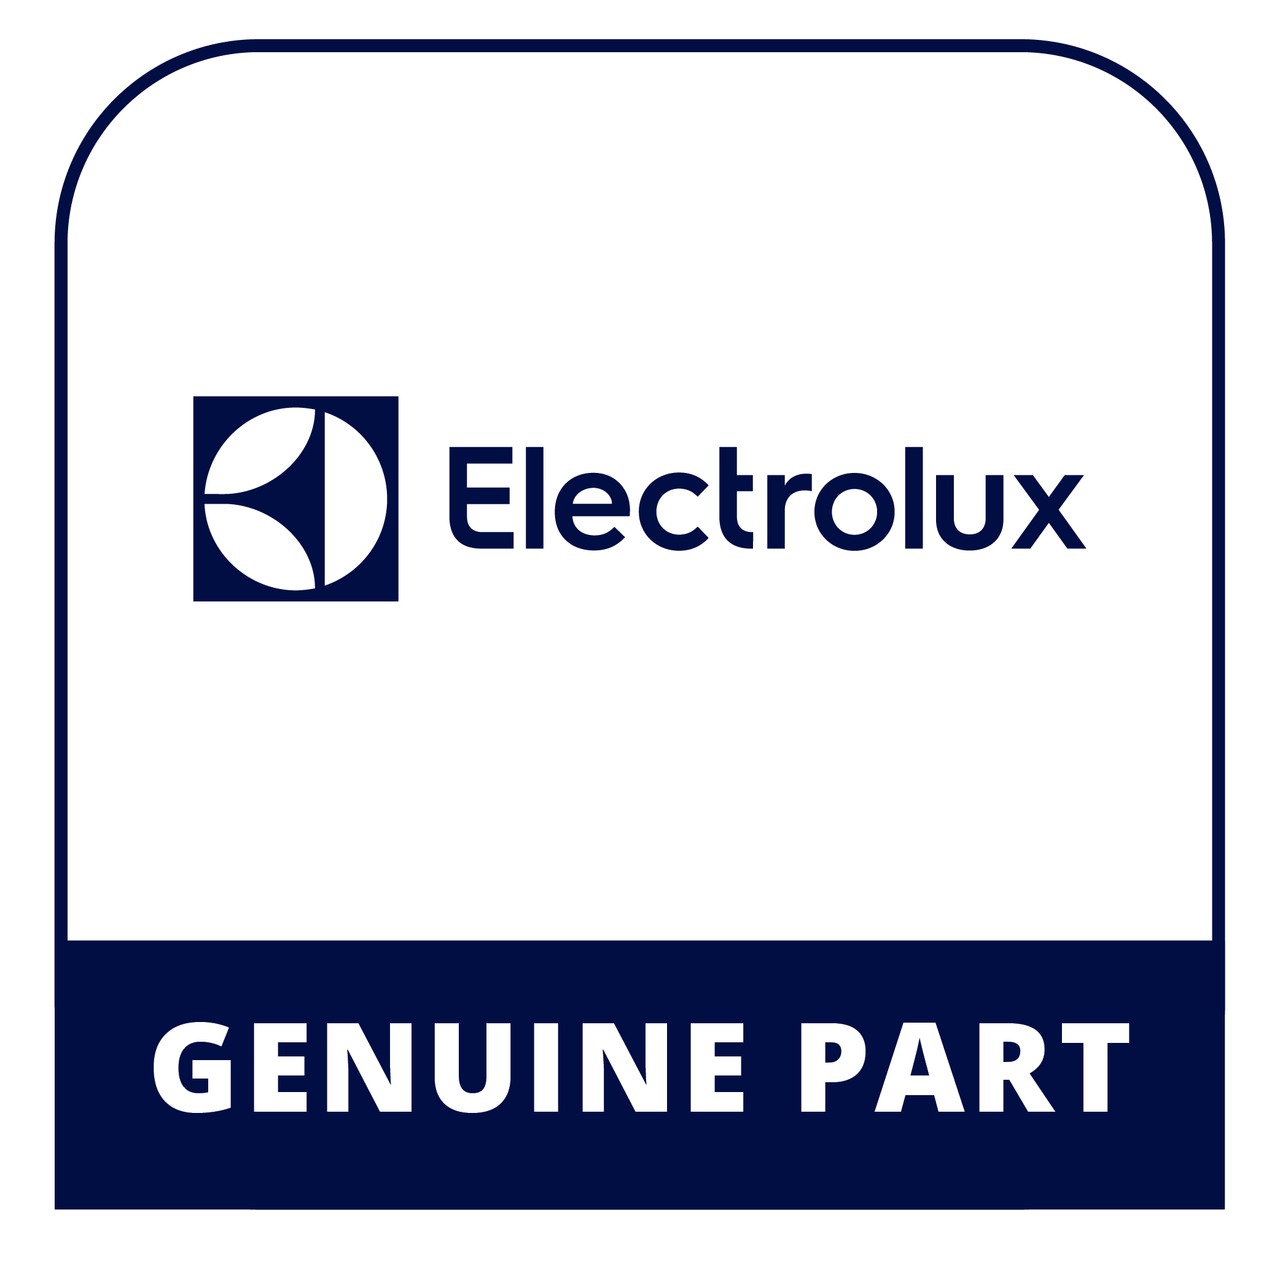 Frigidaire - Electrolux 316462441 Owners Manual - Genuine Electrolux Part